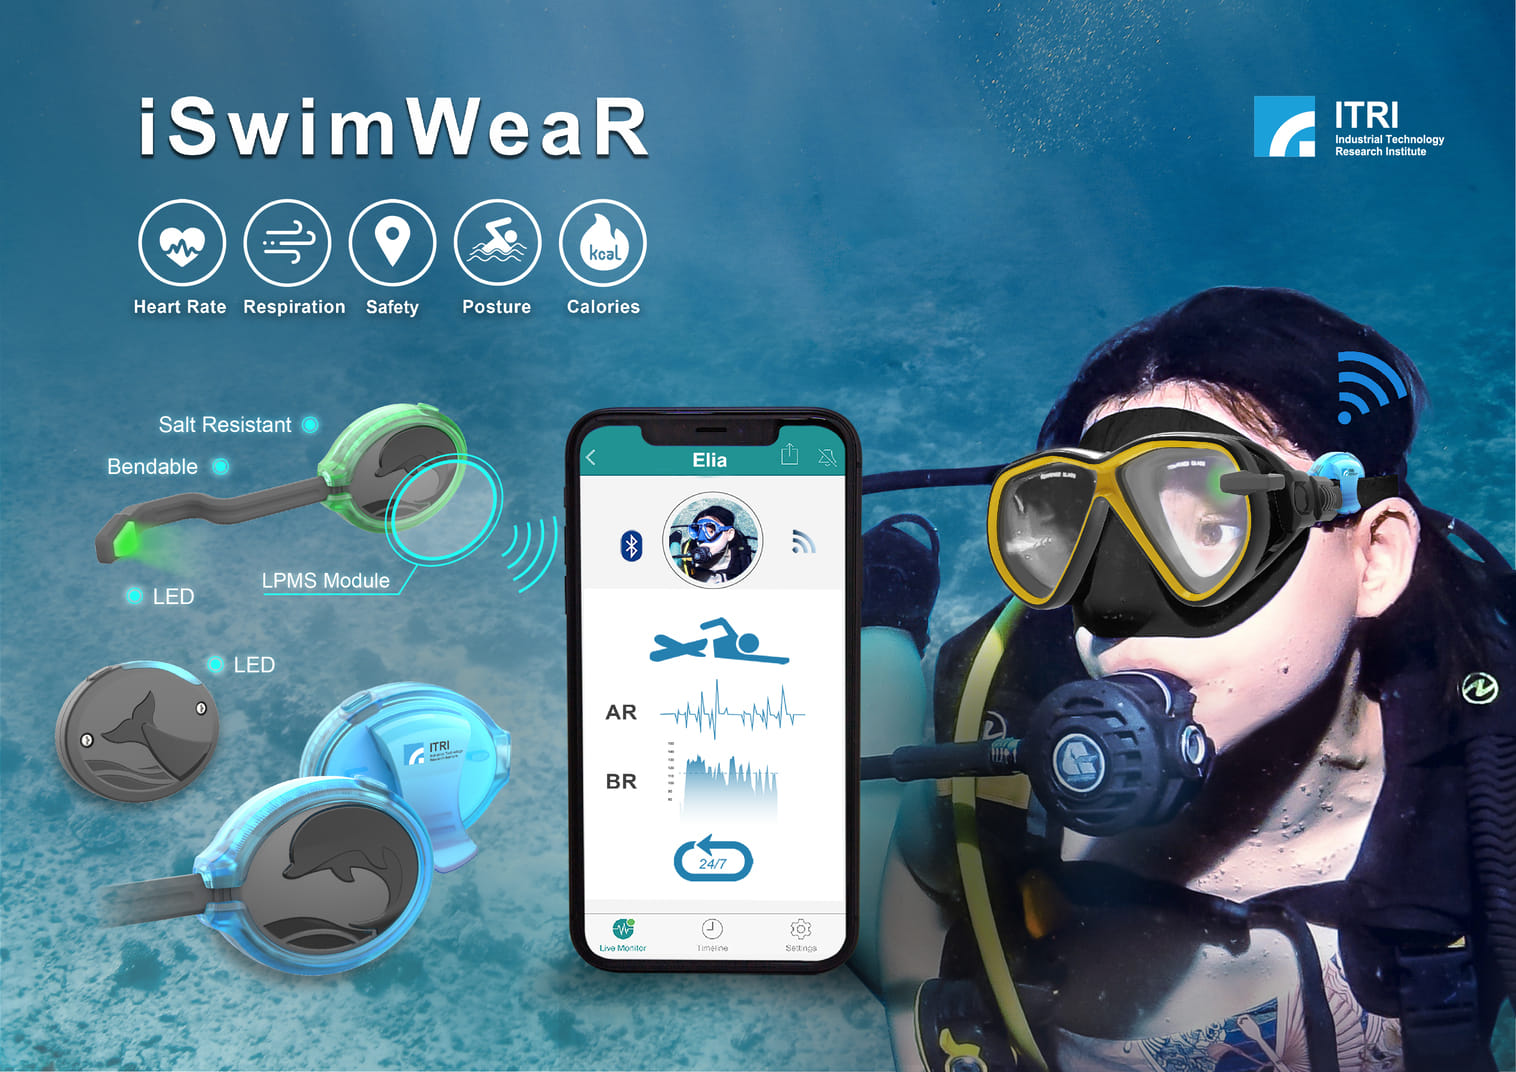 iSwimWeaR captures underwater vitals, including heart rate, breathing rate, and physical activity level.